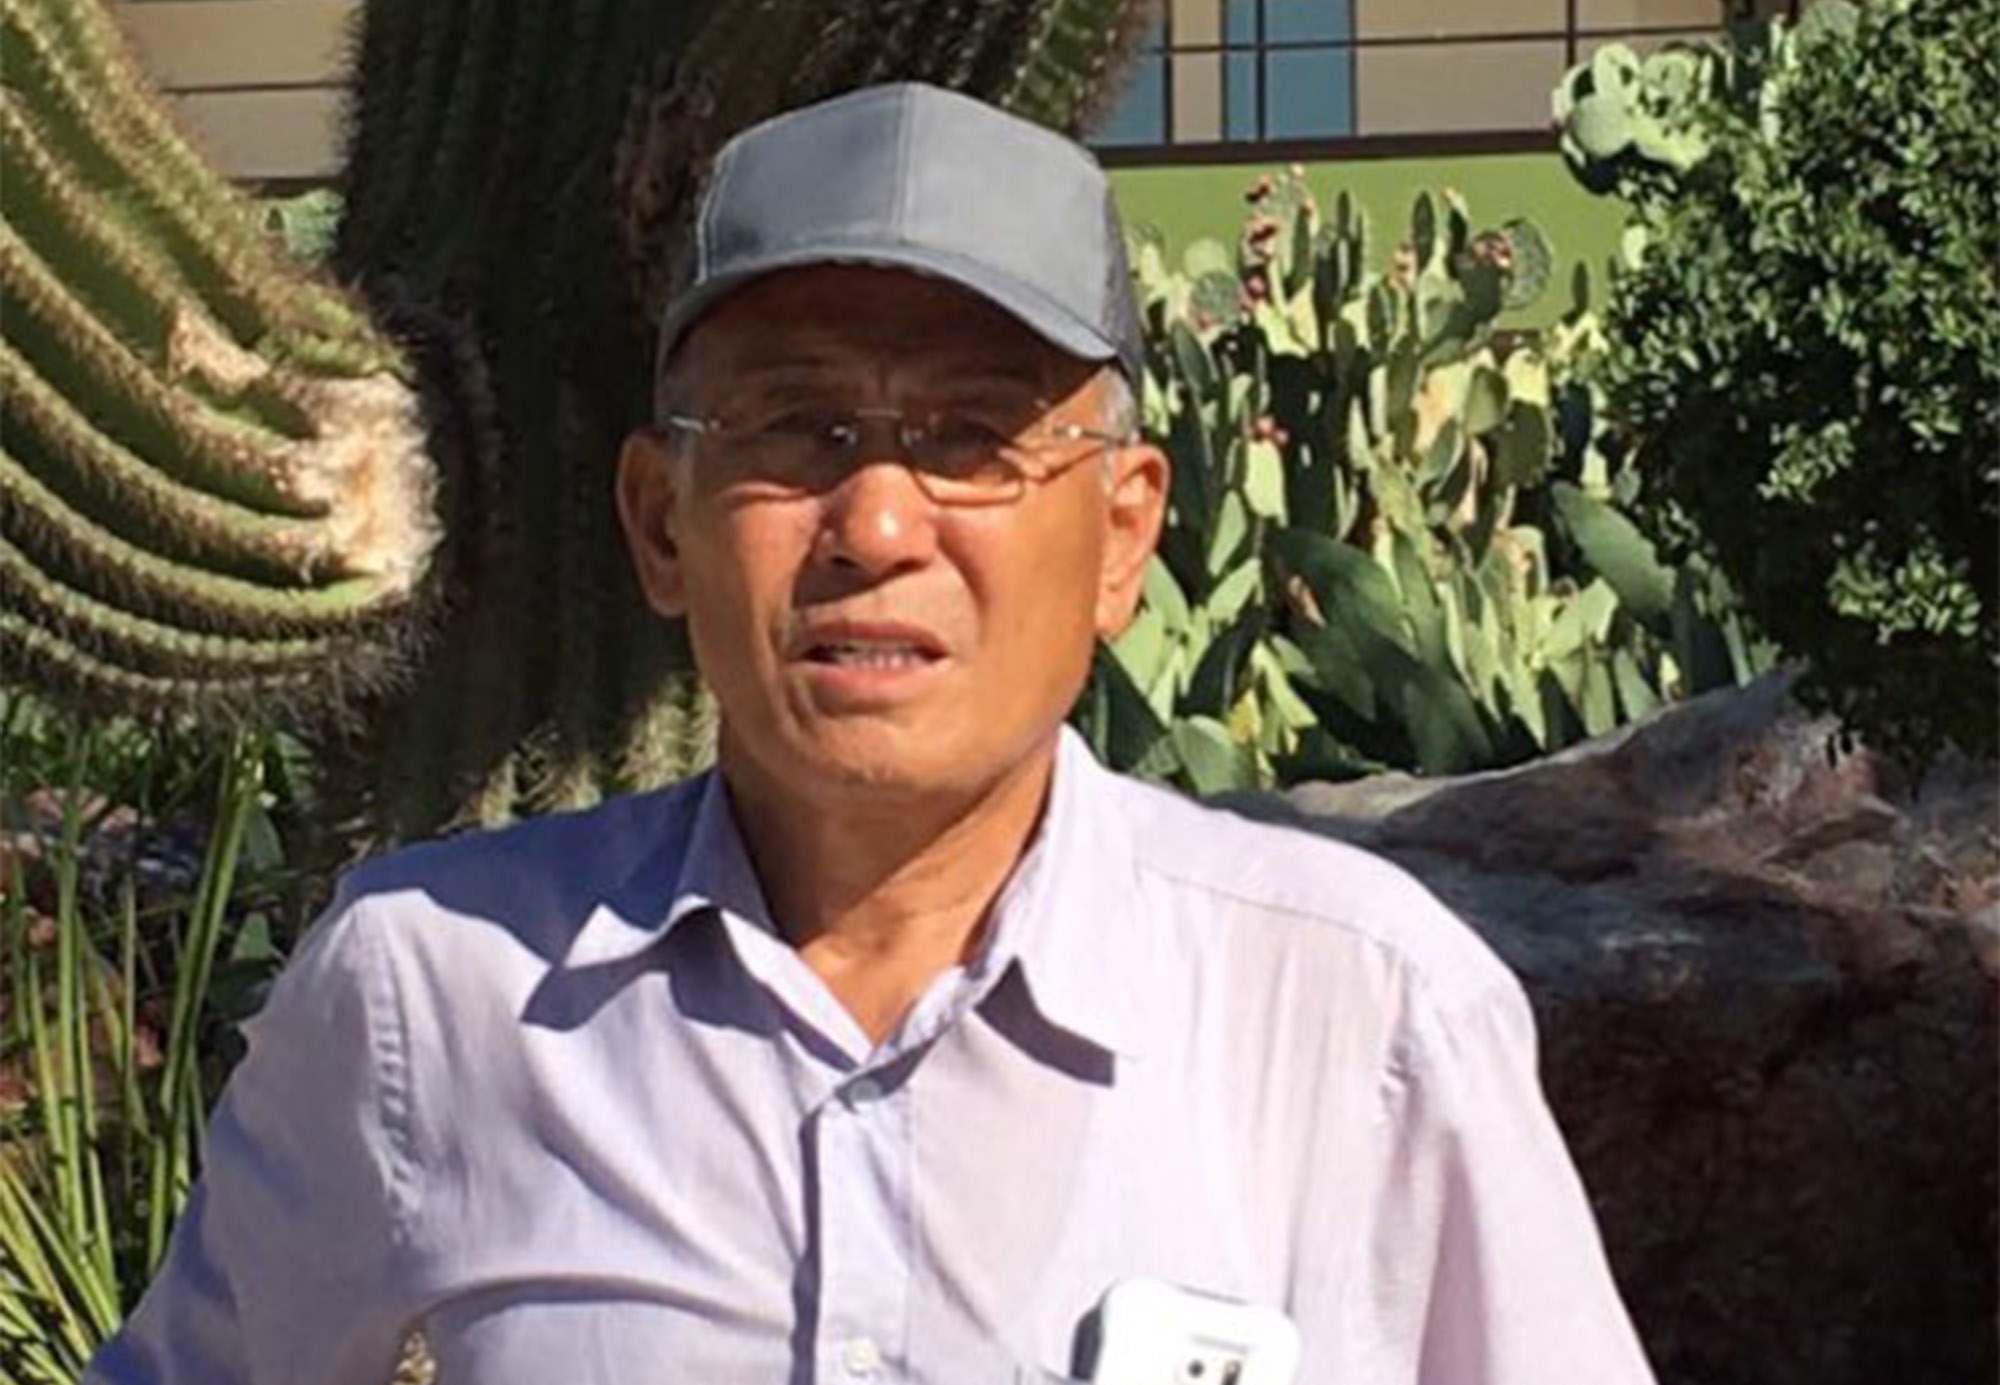 PHOTO: This photo released by the Los Angeles County Sheriff's Department shows 73-year-old hiker Eugene Jo who went missing on June 22, 2019 and was found a week later on June 29, 2019.